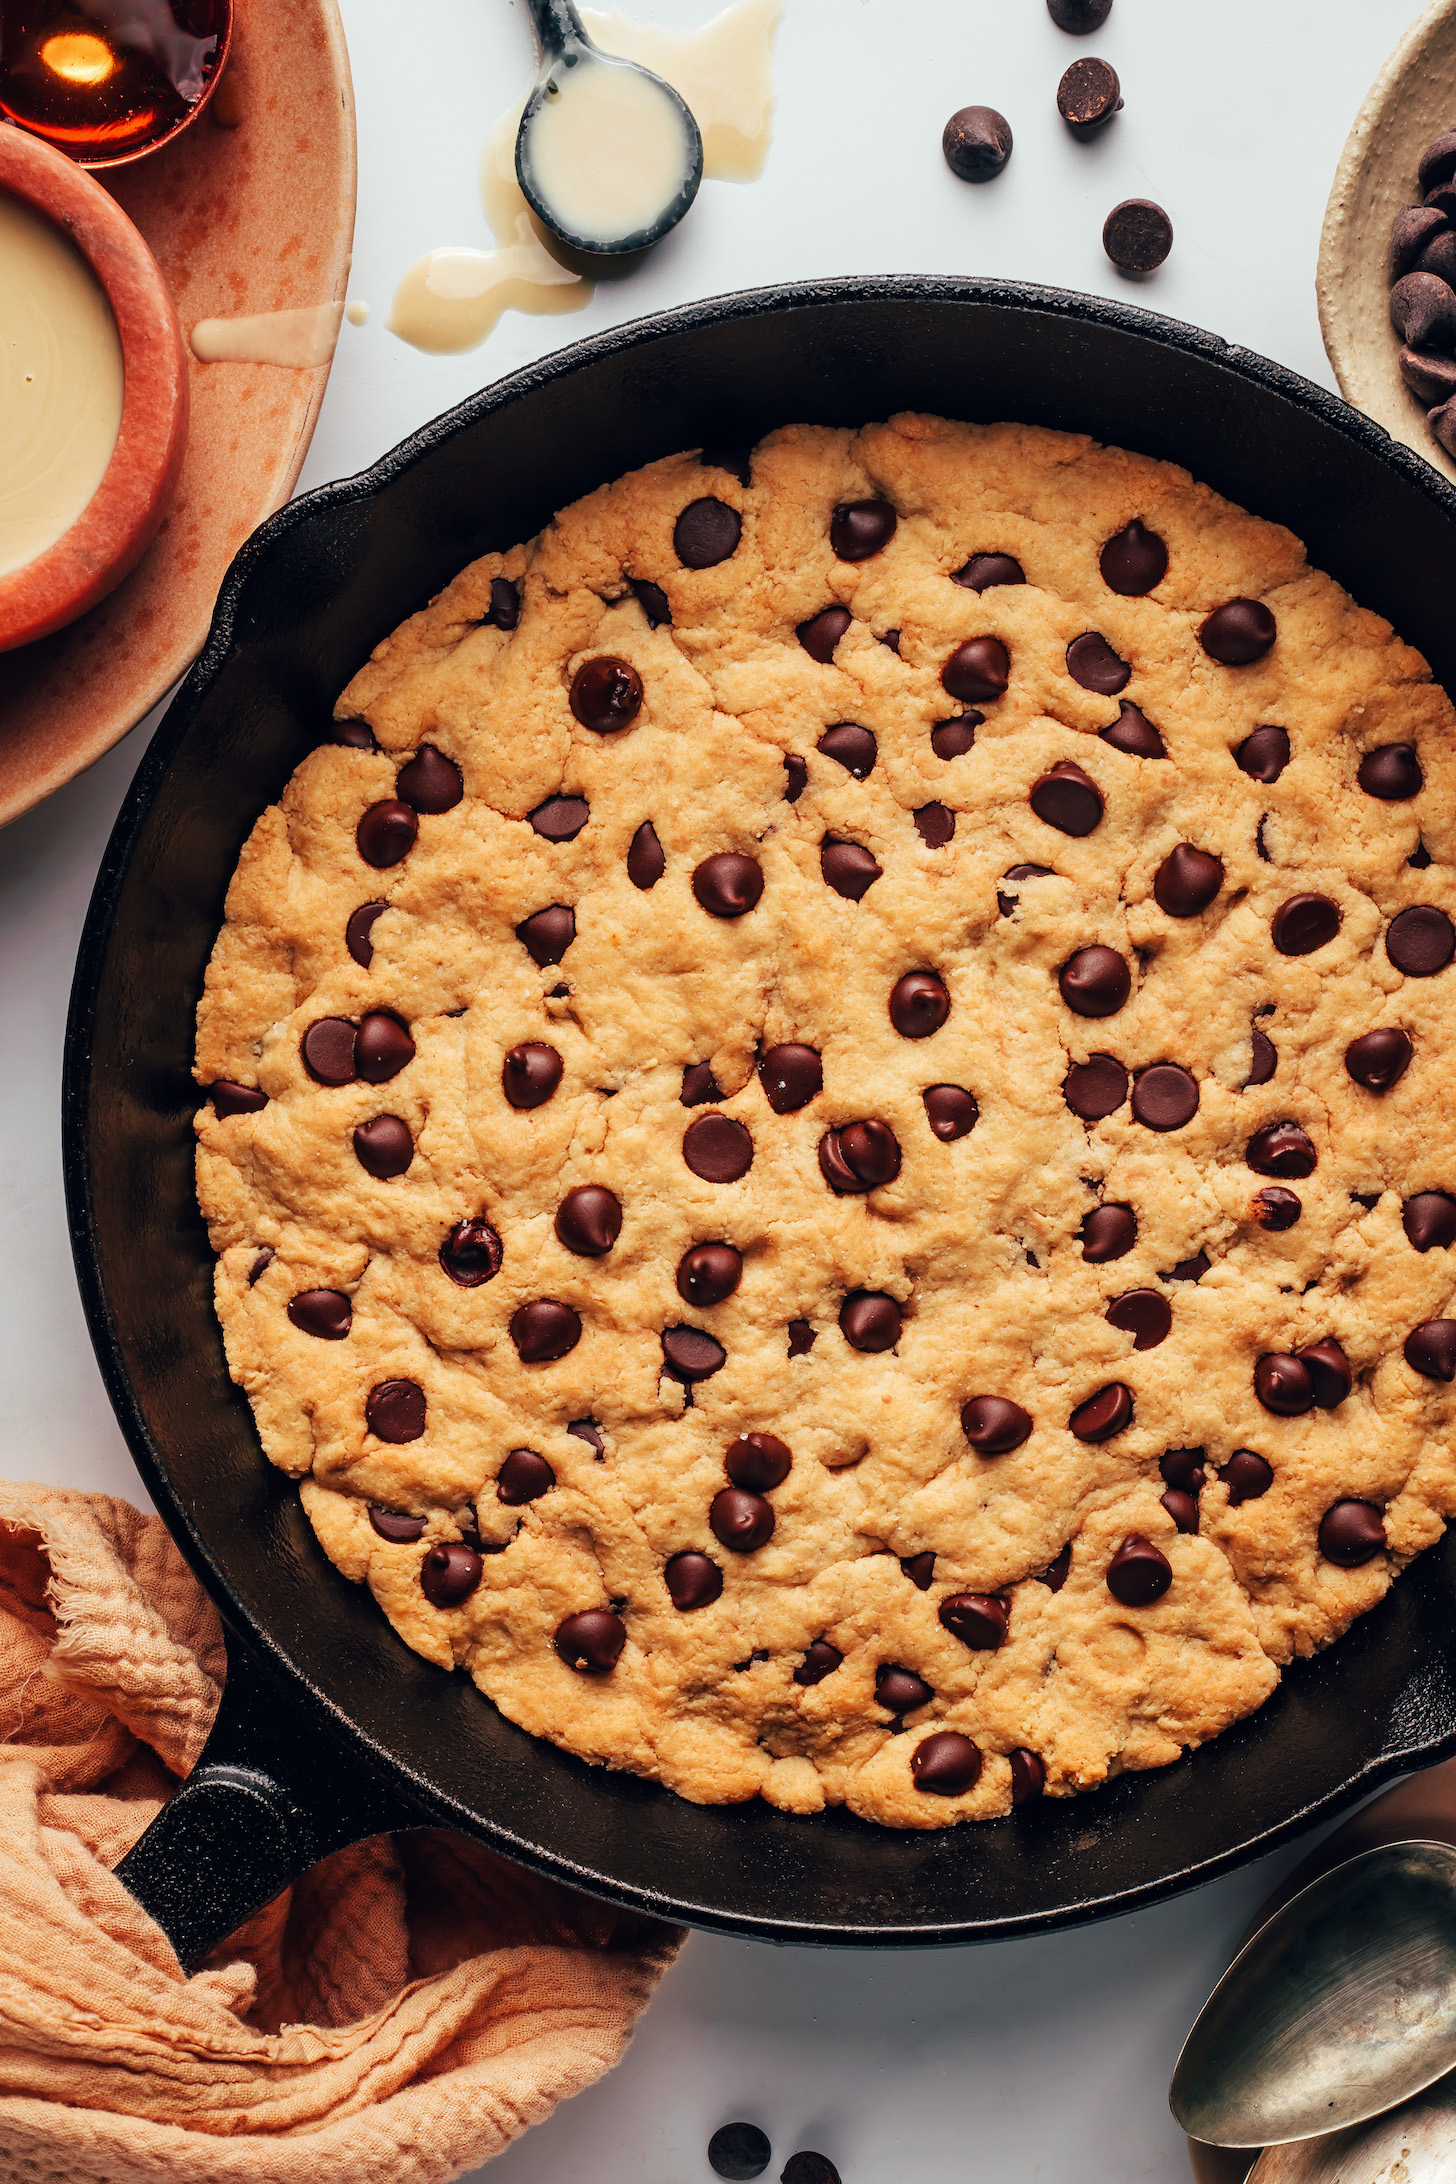 Freshly baked skillet cookie in a cast iron skillet